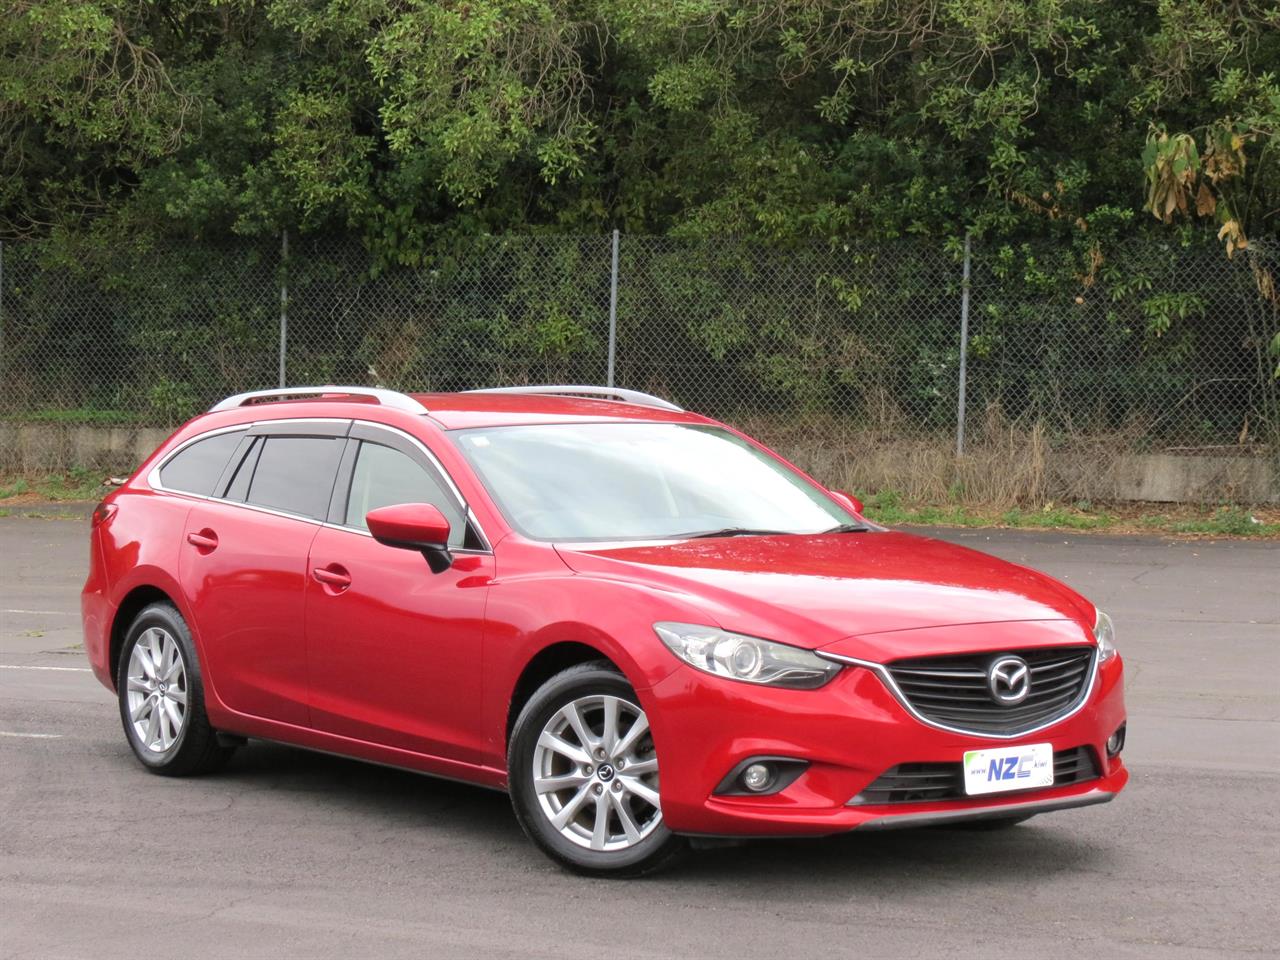 2013 Mazda Atenza only $54 weekly